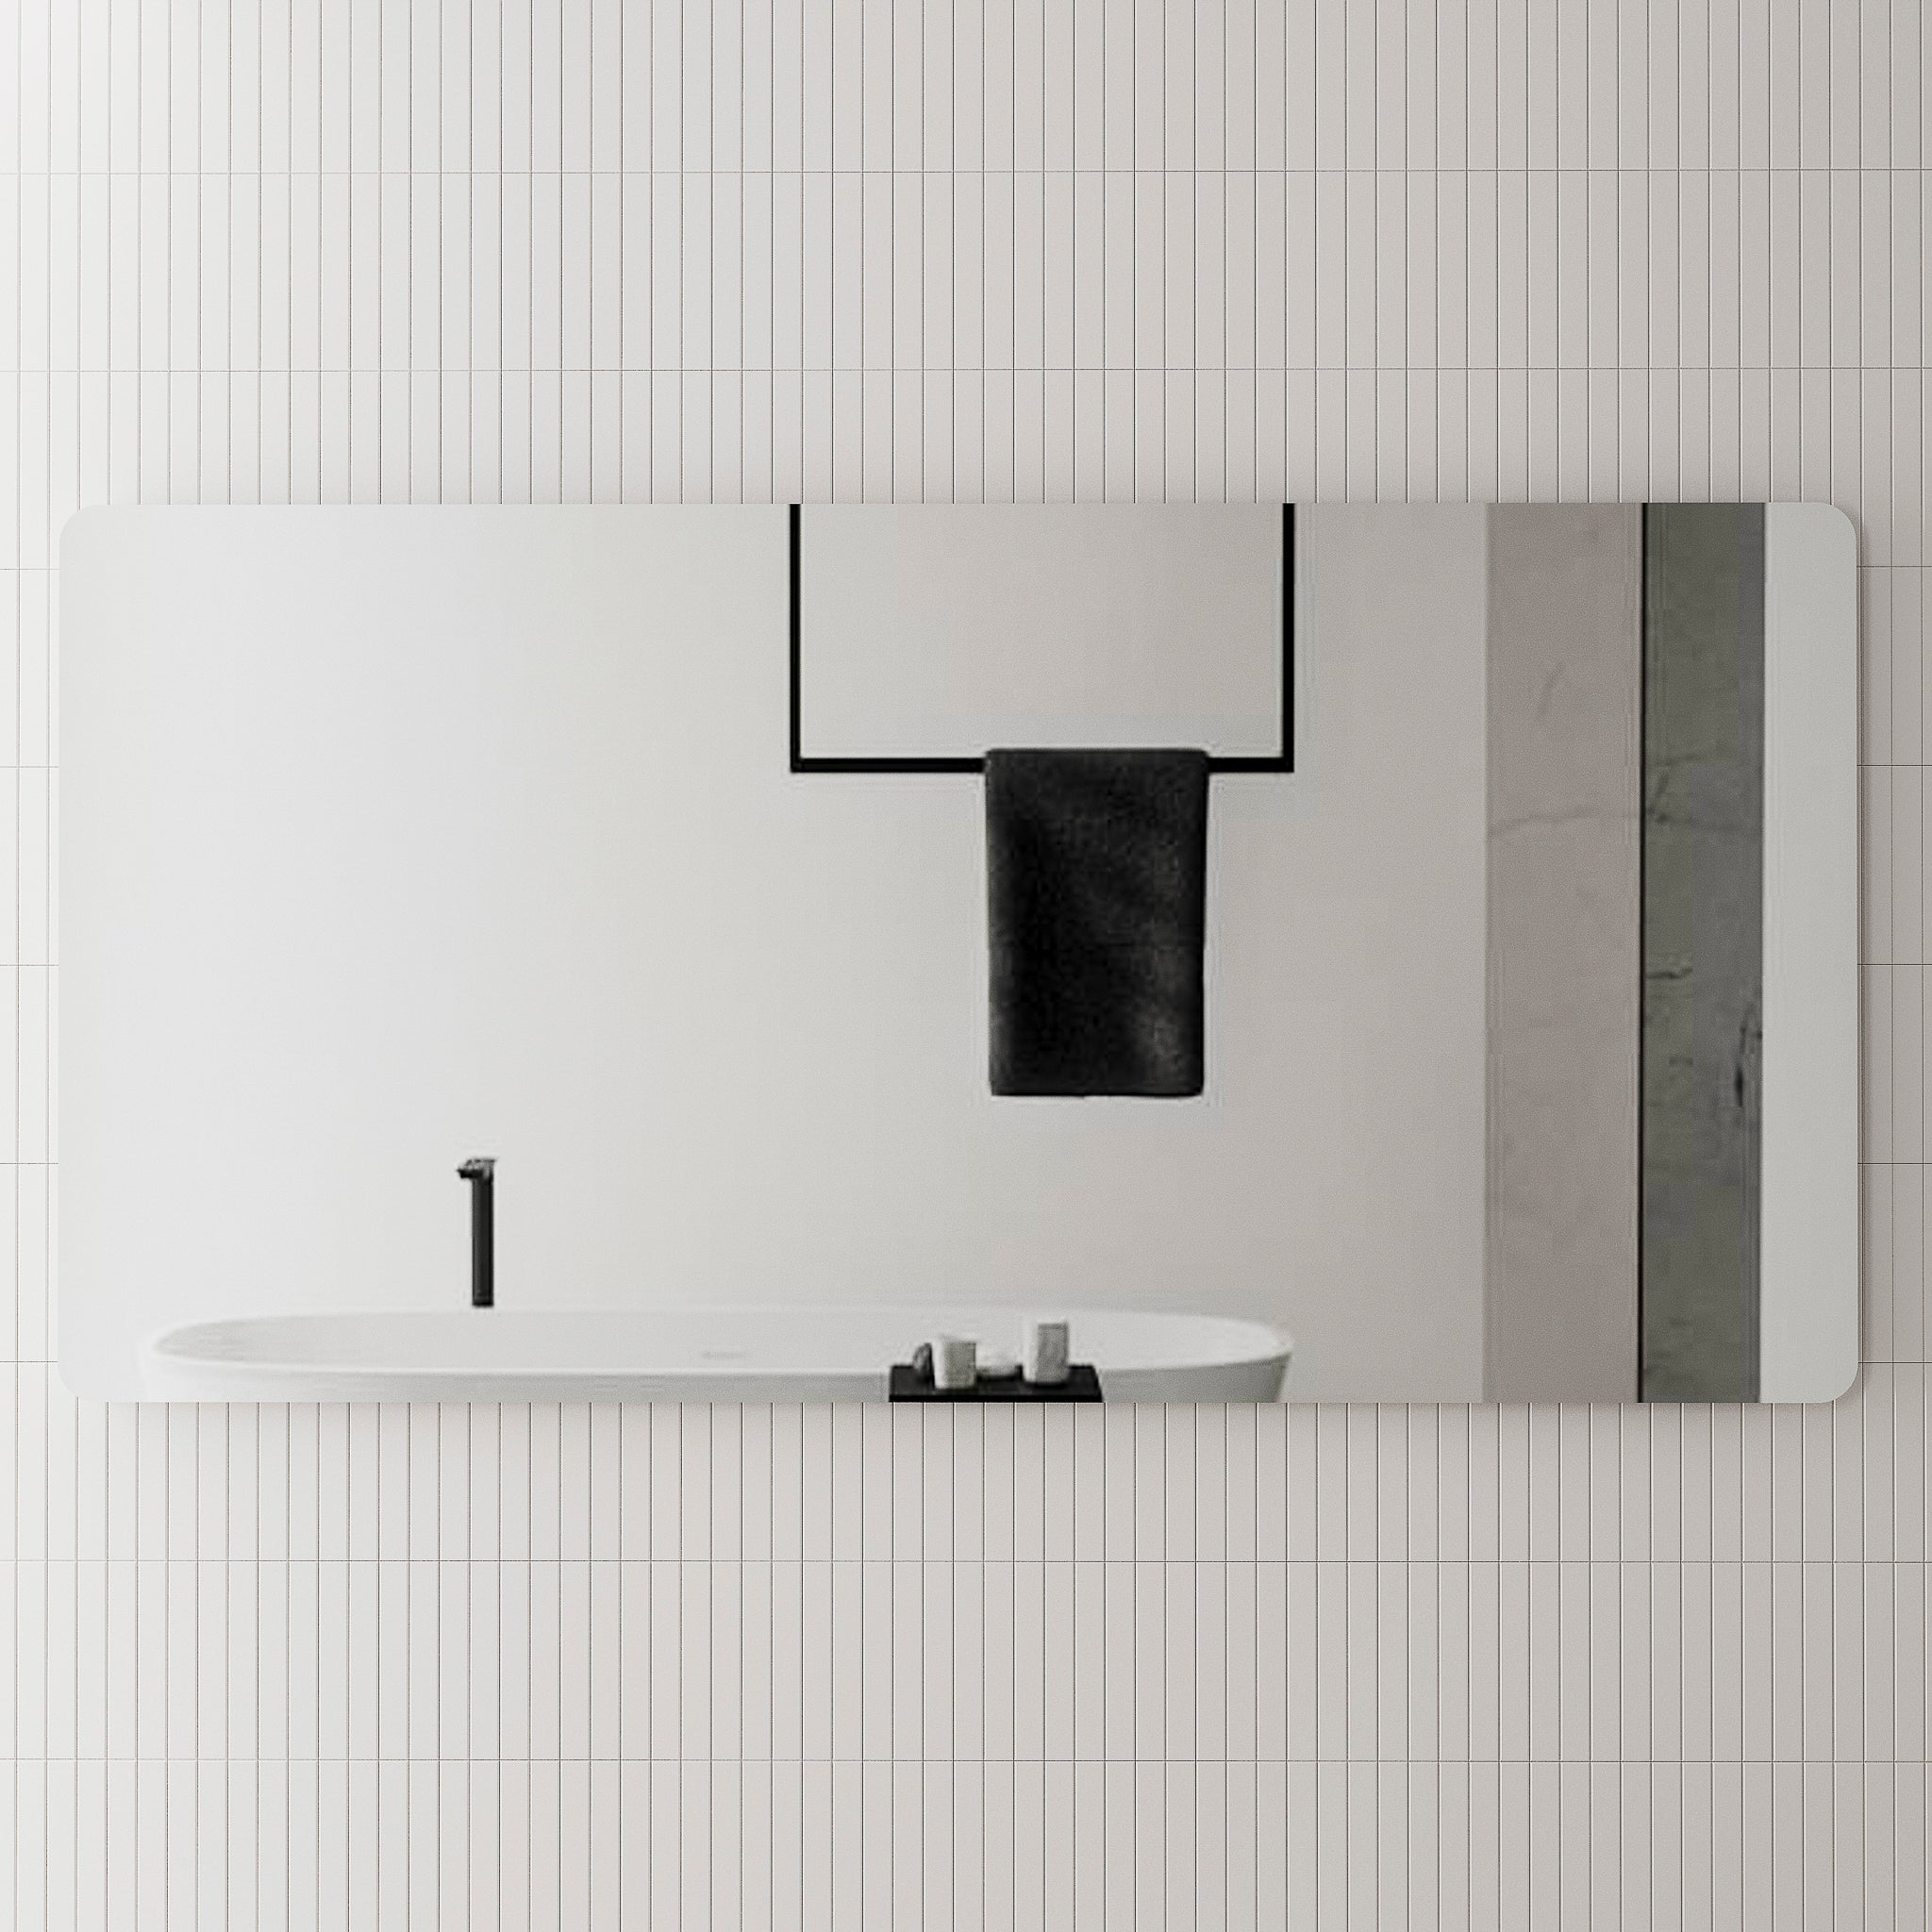 Wall Mirrors for Sale, ATS Sydney